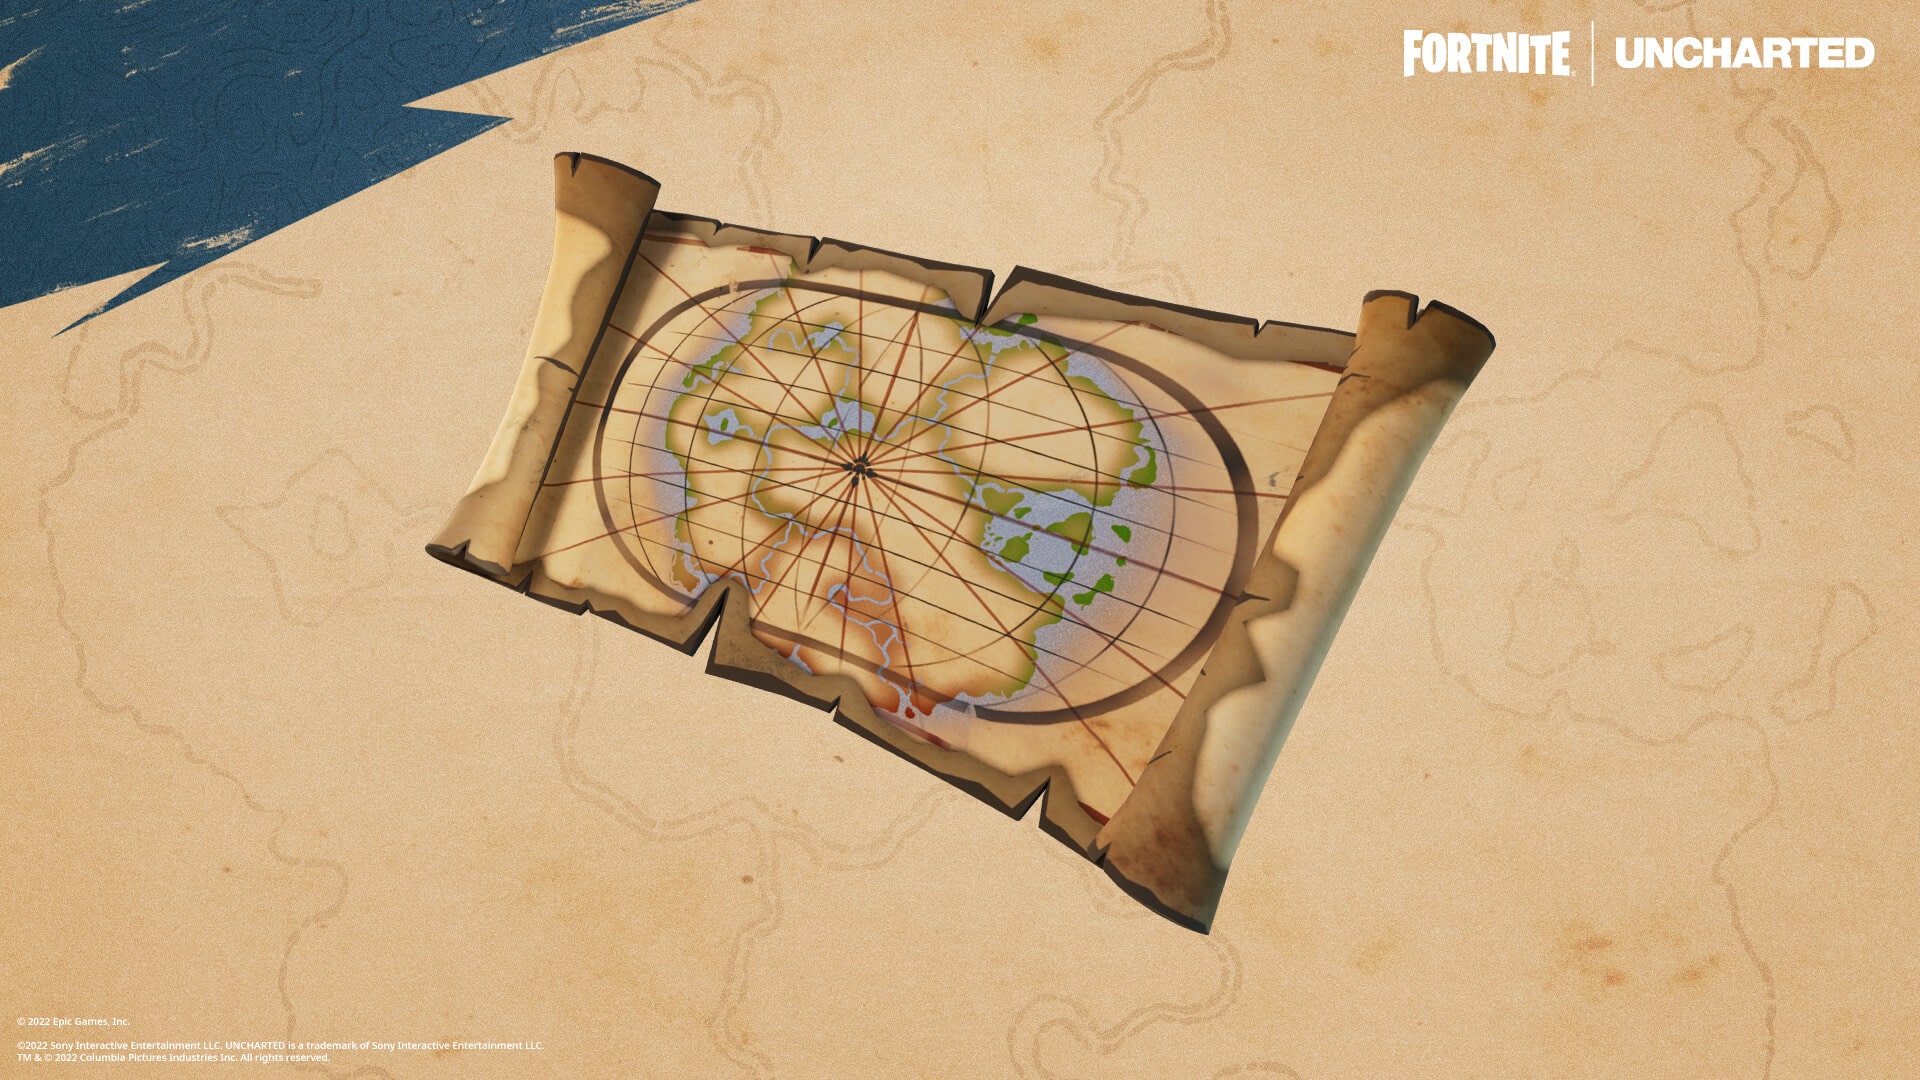 Fortnite Treasure Maps: Where to Find and How to Use